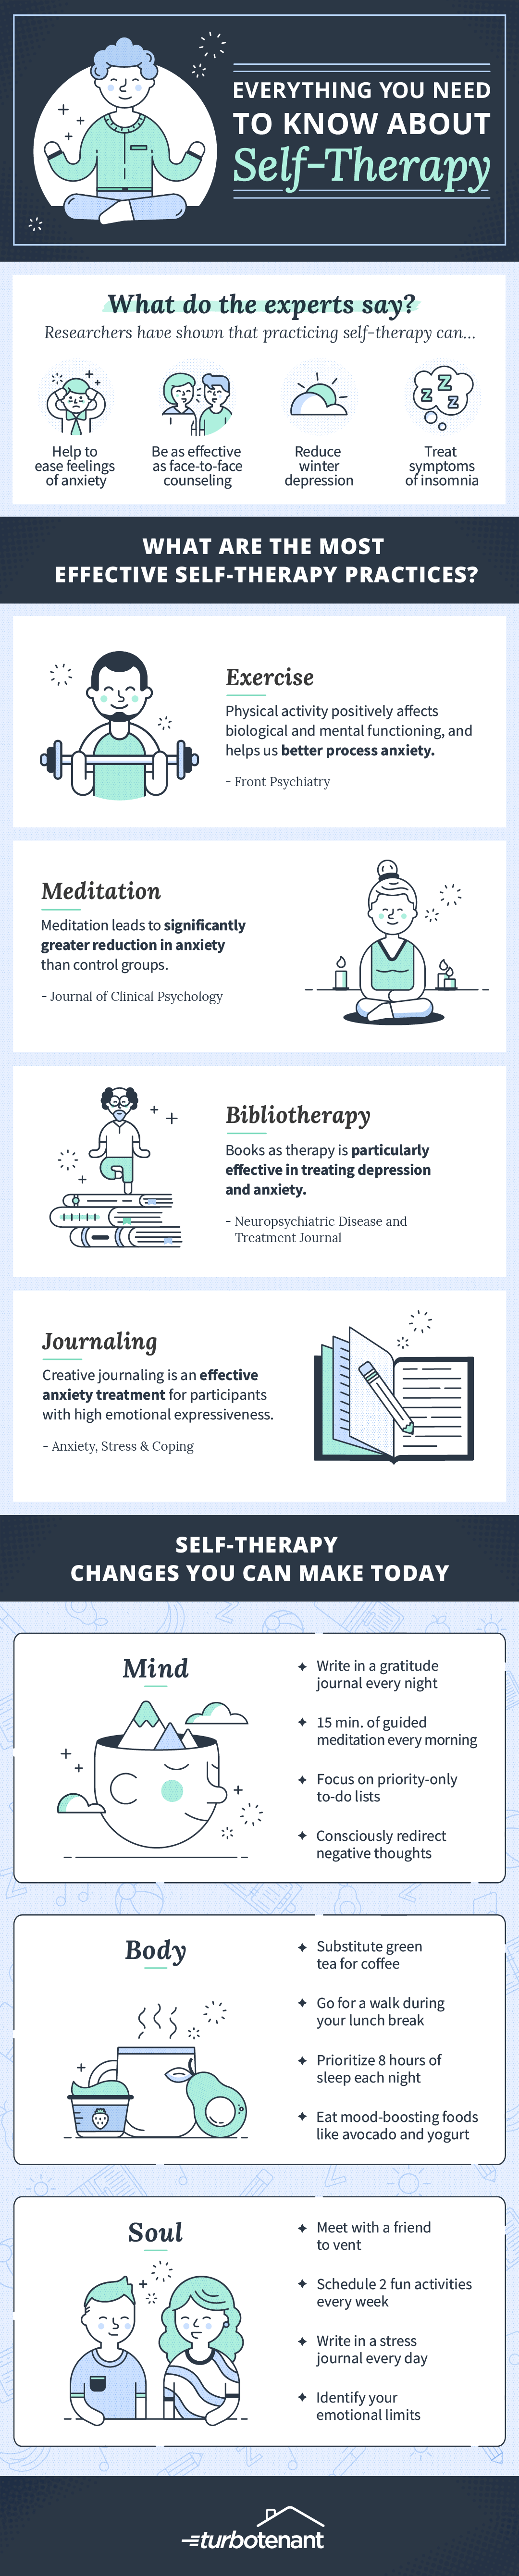 Self-Therapy Tips to Keep You Relaxed - Infographic